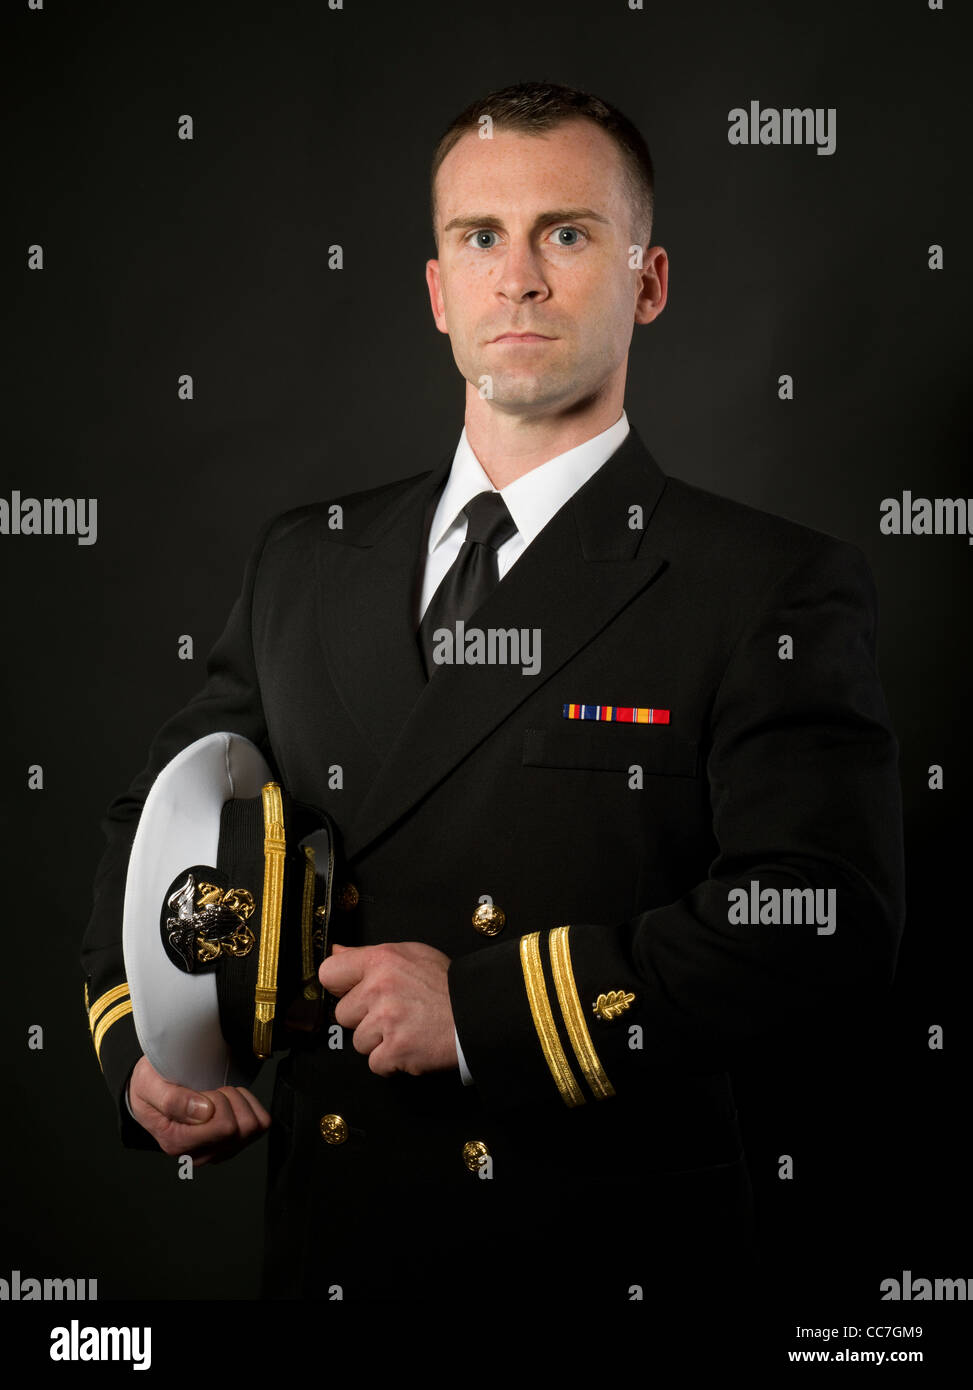 United States Navy Officer in Service Dress Blues Uniform with Combination Cover ( hat ) Stock Photo